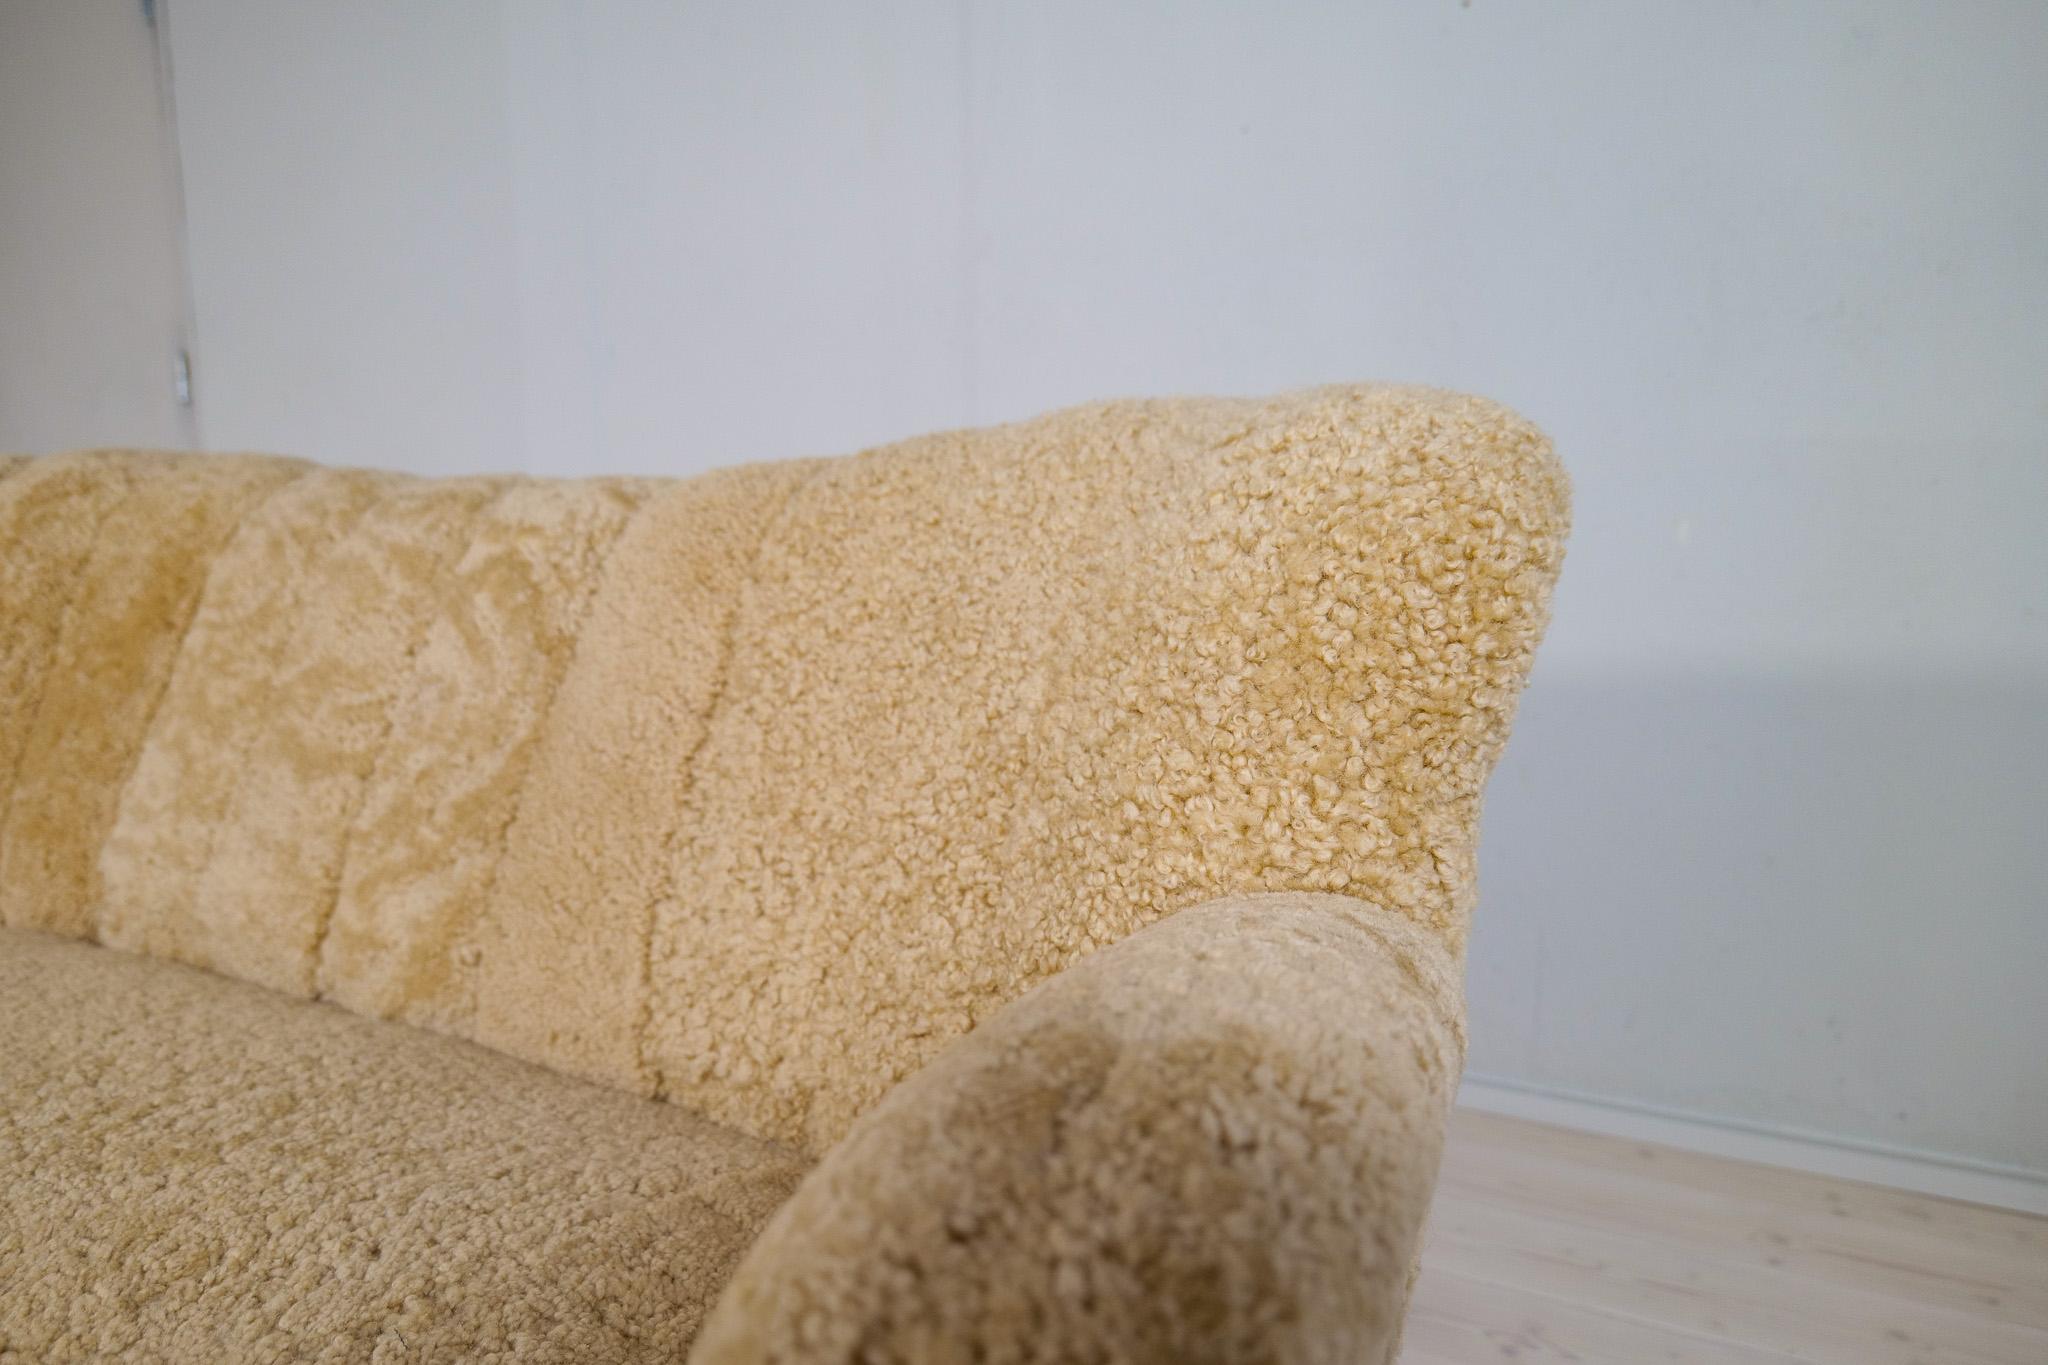 Midcentury Sculptrual Sheepskin/Shearling Sofa in Manors of Marta Blomstedt 5